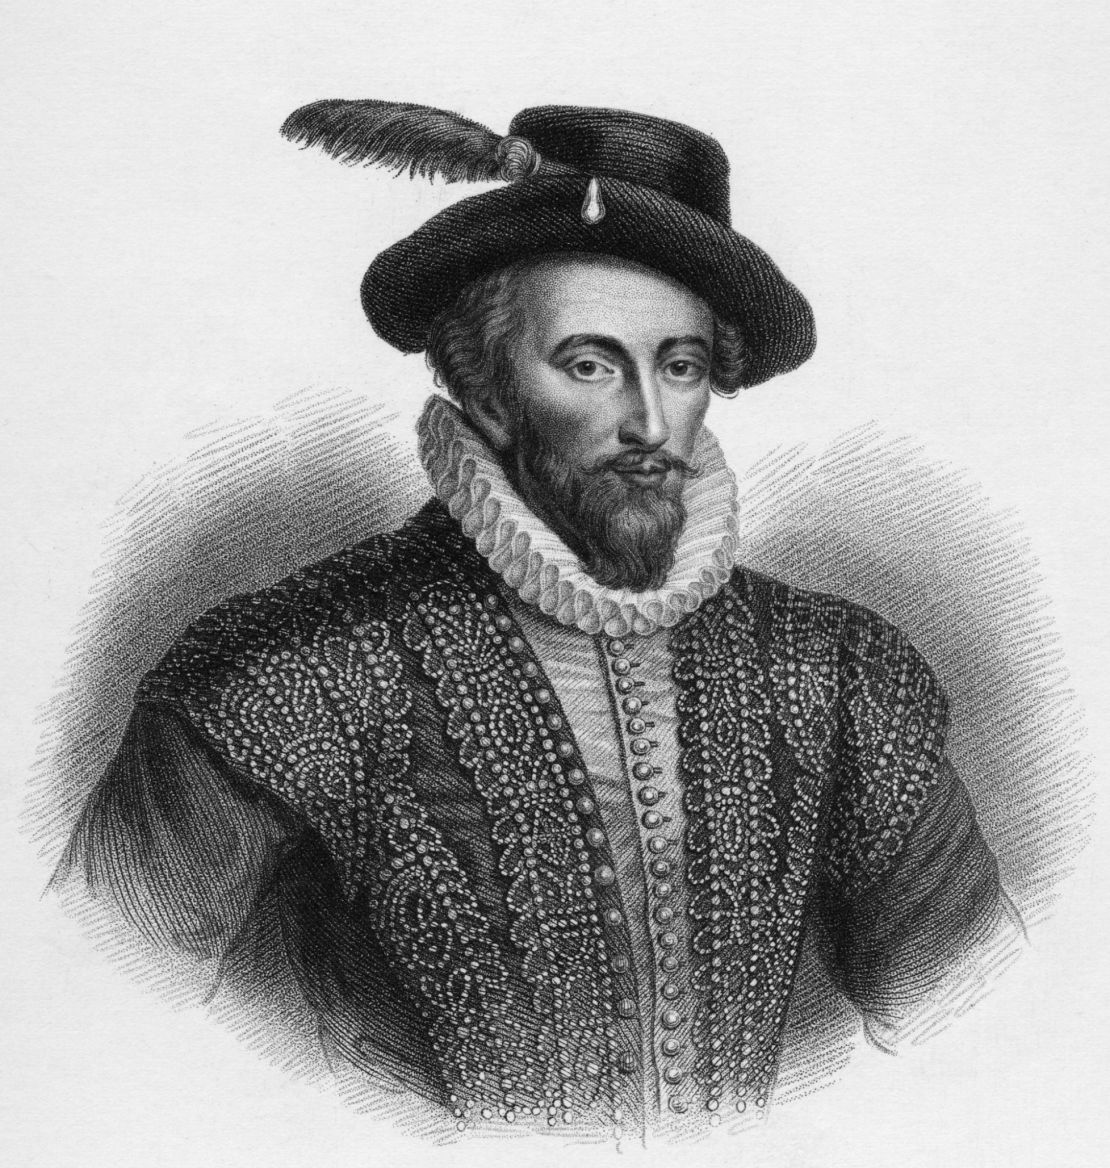 English writer, soldier, politician, explorer and spy Sir Walter Raleigh, circa 1595. From an original engraving.